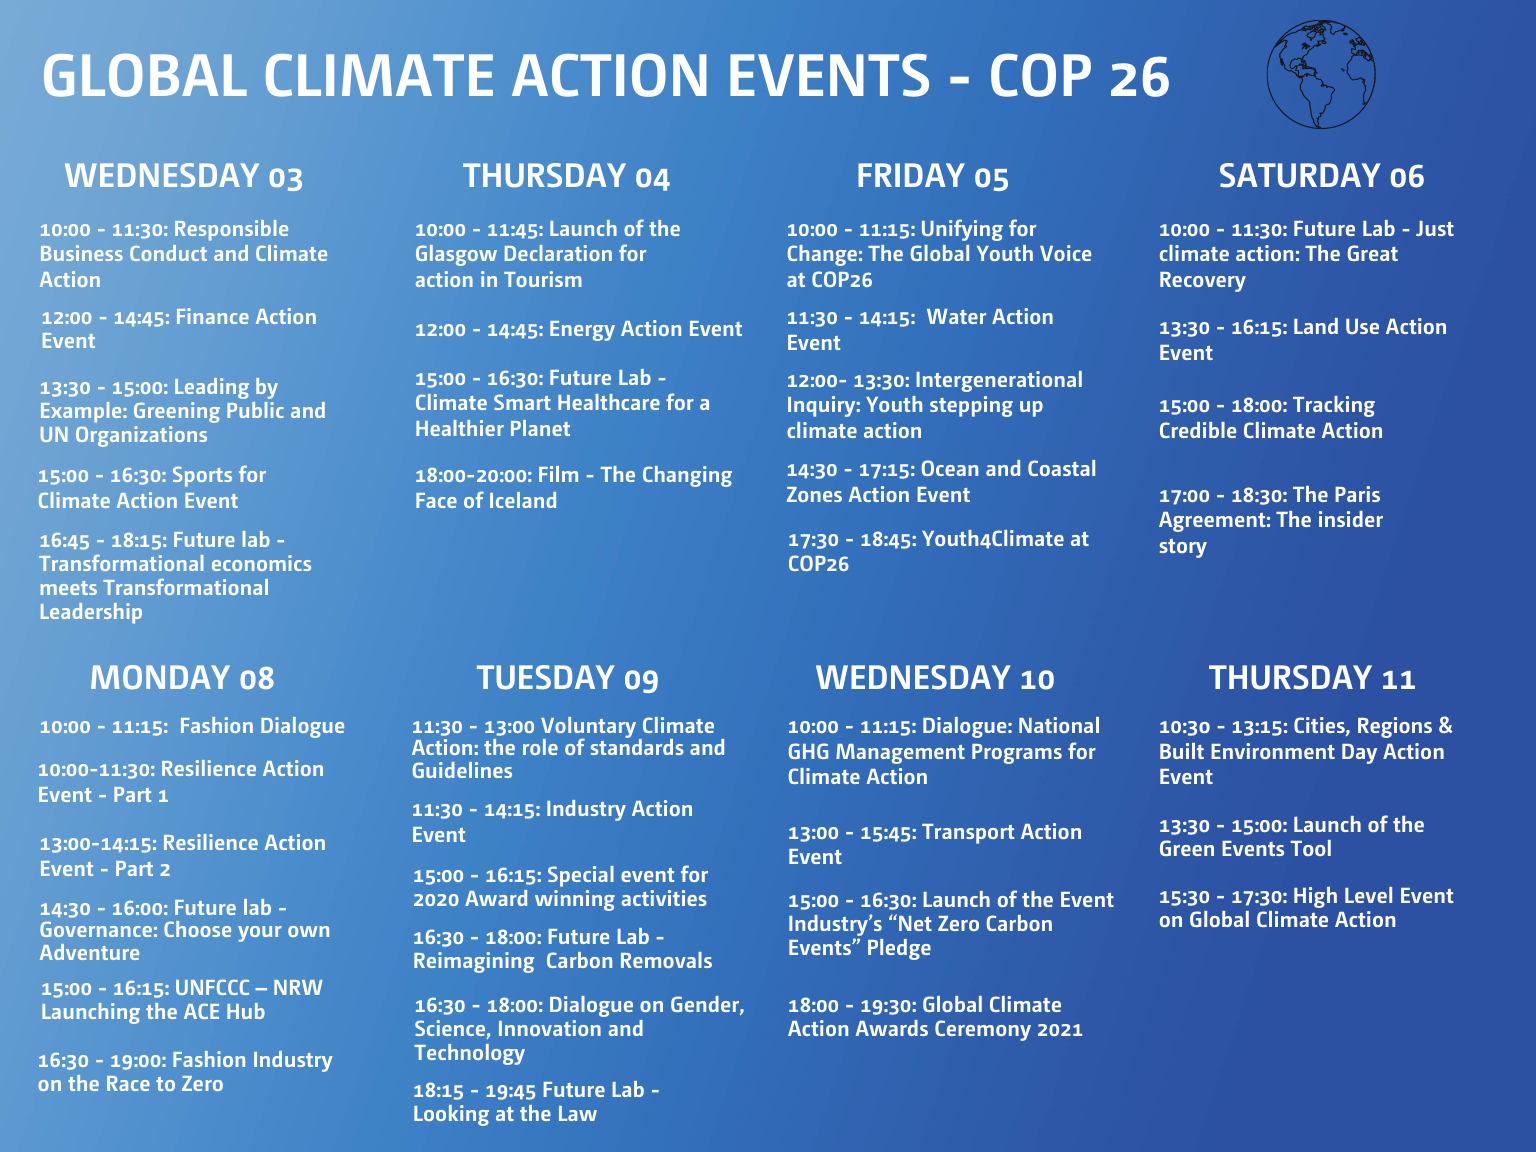 Global Climate Action at COP 26 UNFCCC